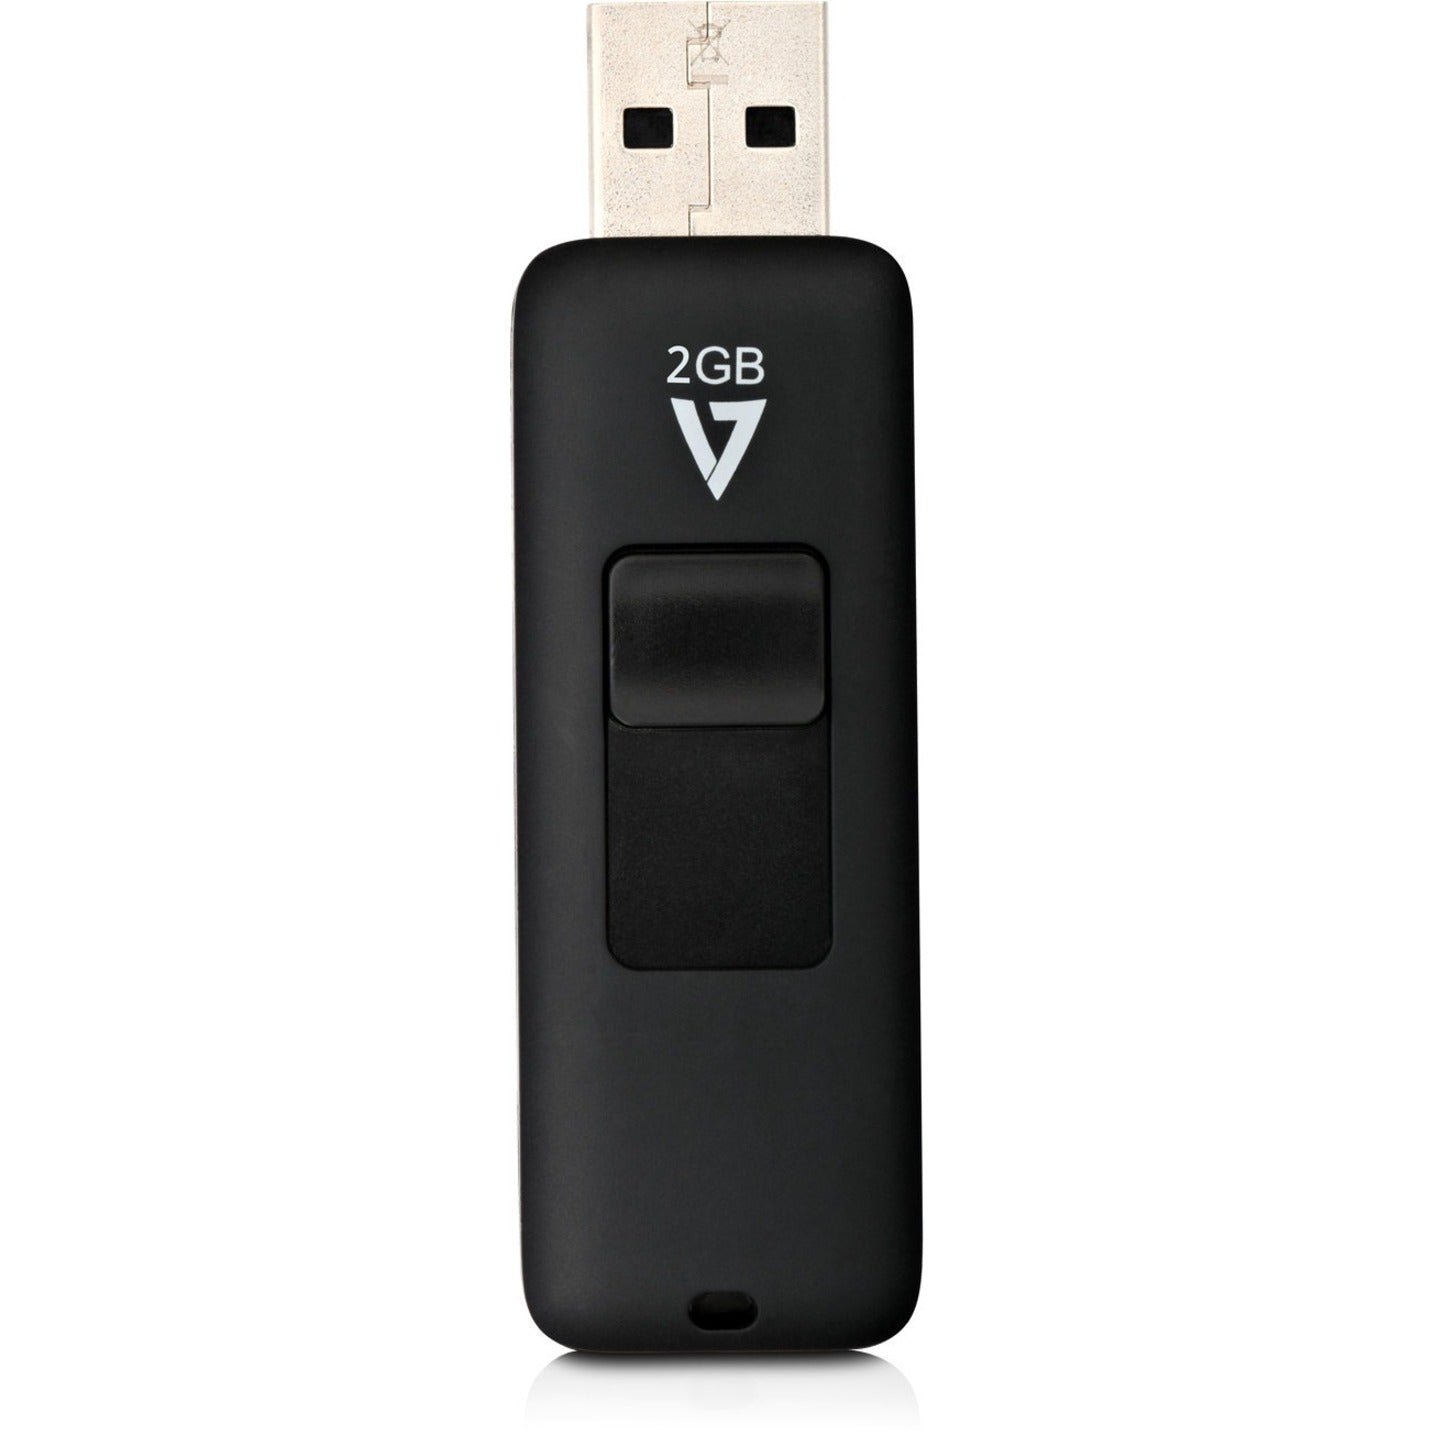 V7 VF22GAR-3N 2GB USB 2.0 Flash Drive - With Retractable USB connector, 5 Year Warranty, RoHS & WEEE Certified